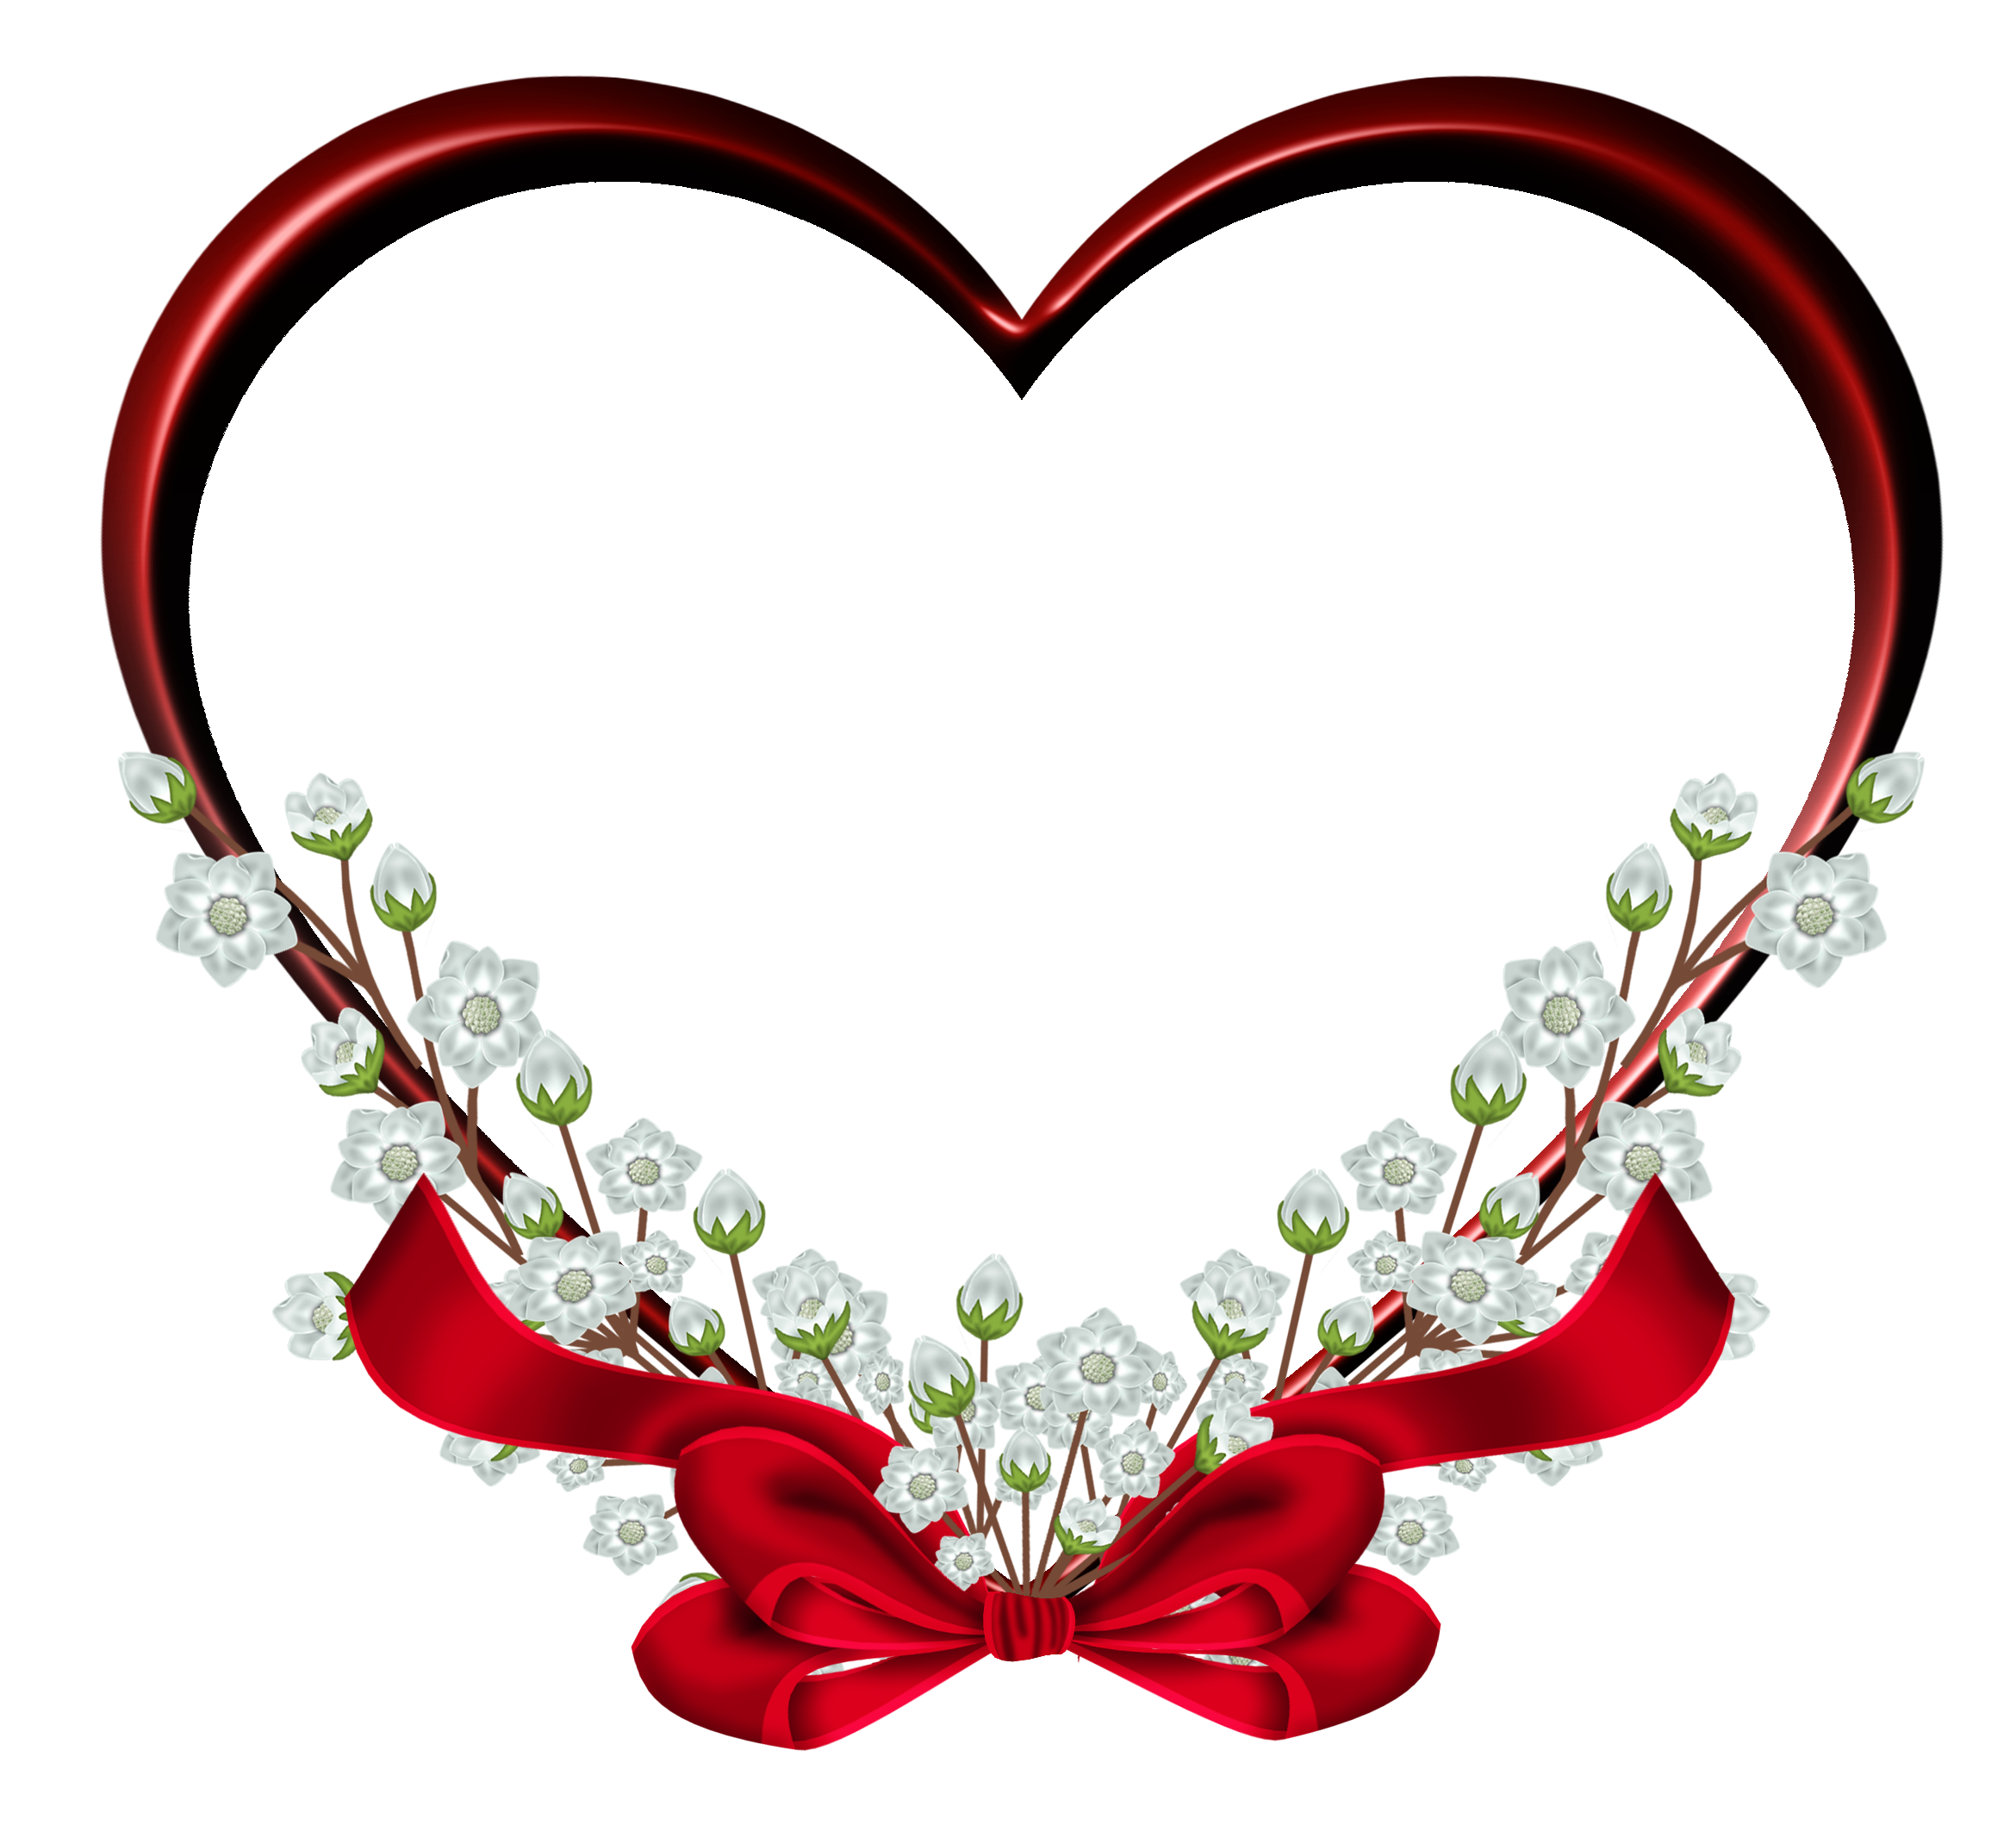 Transparent Red Heart Frame Decor PNG Clipart